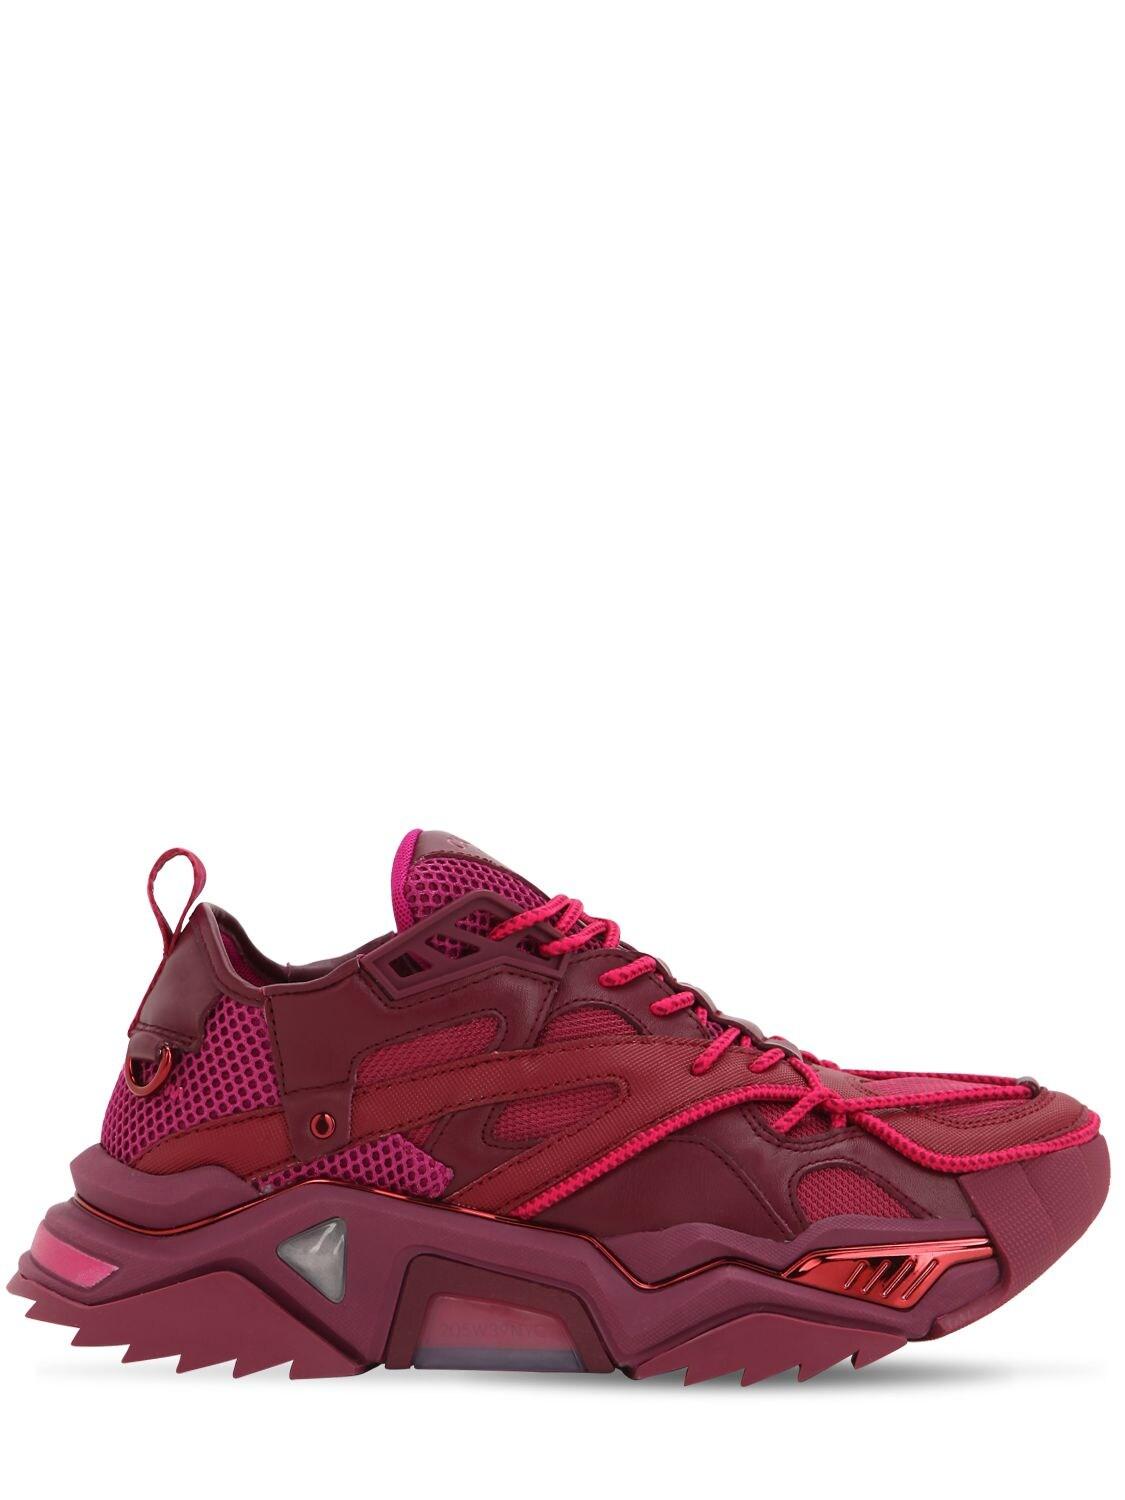 CALVIN KLEIN 205W39NYC Strike 205 Chunky Leather Sneakers in Plum (Red ...